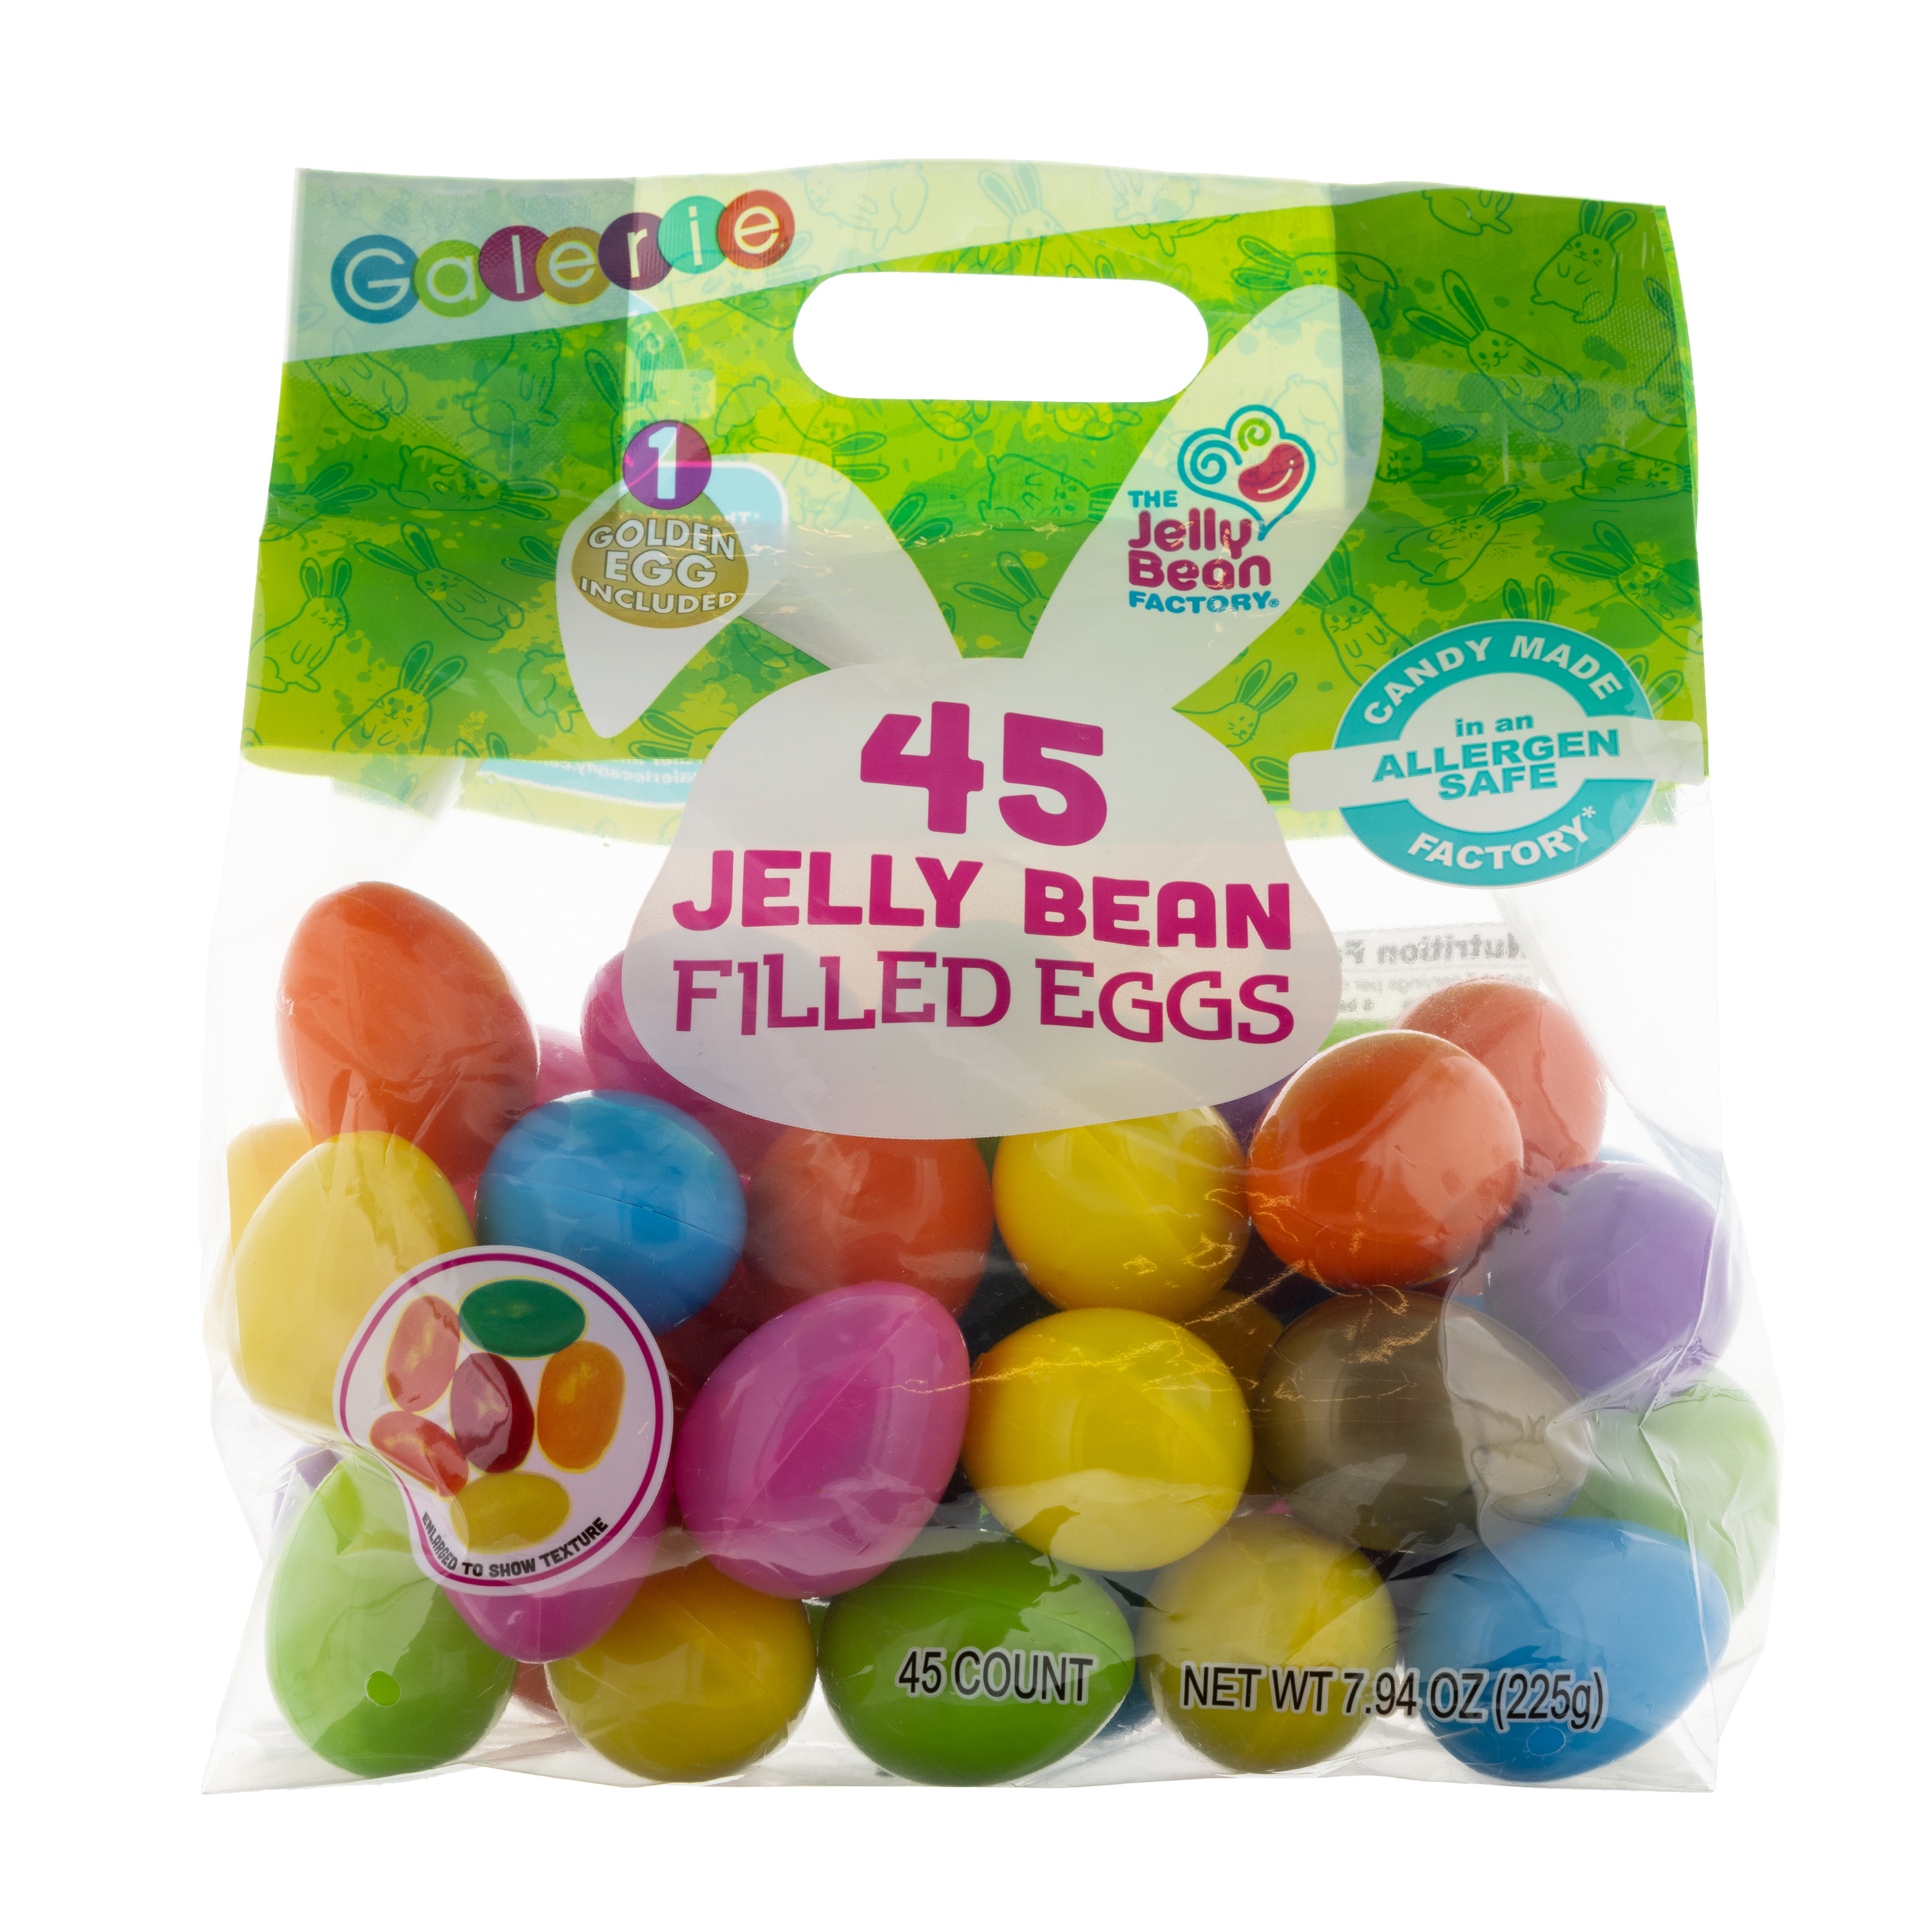 Galerie 45 Count Egg Hunt Bag with Jellybeans, 7.94 oz - image 1 of 5